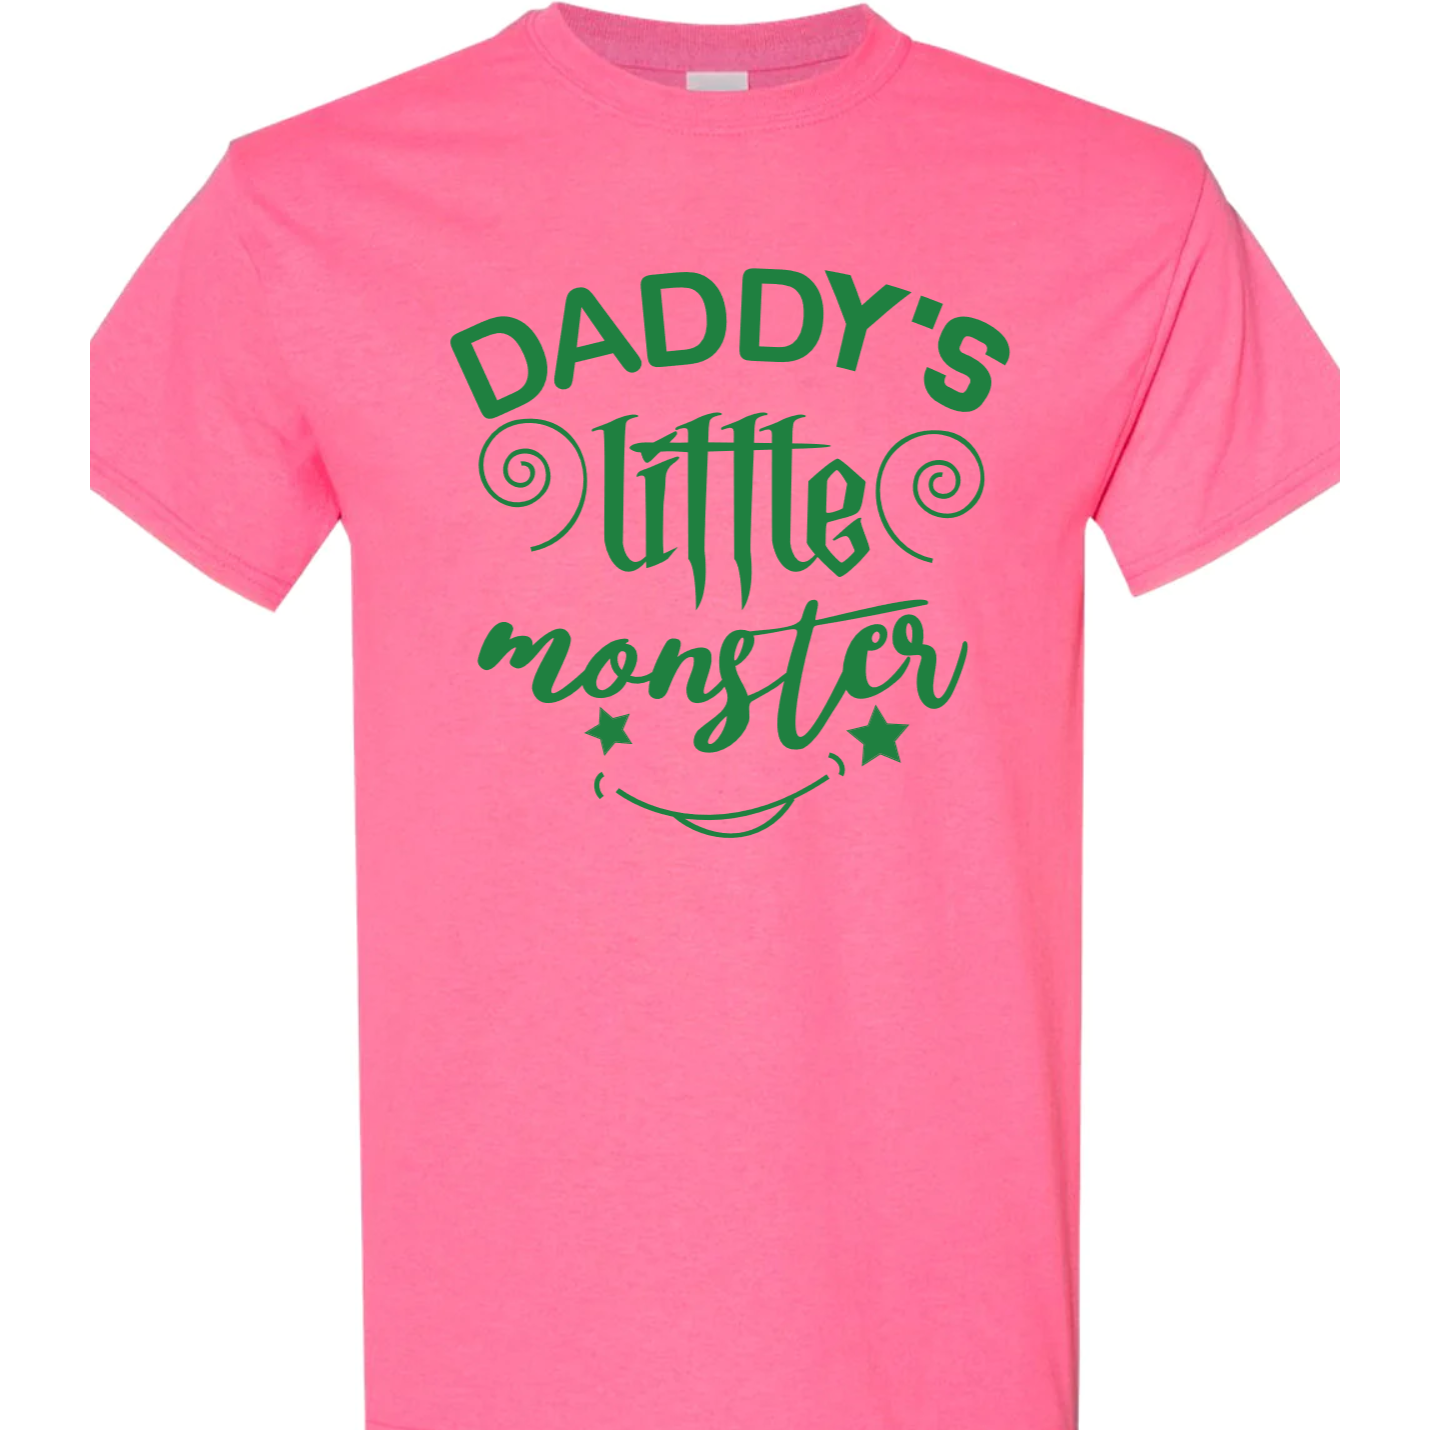 Daddy's Little Monster Vinyl Graphic for Shirts